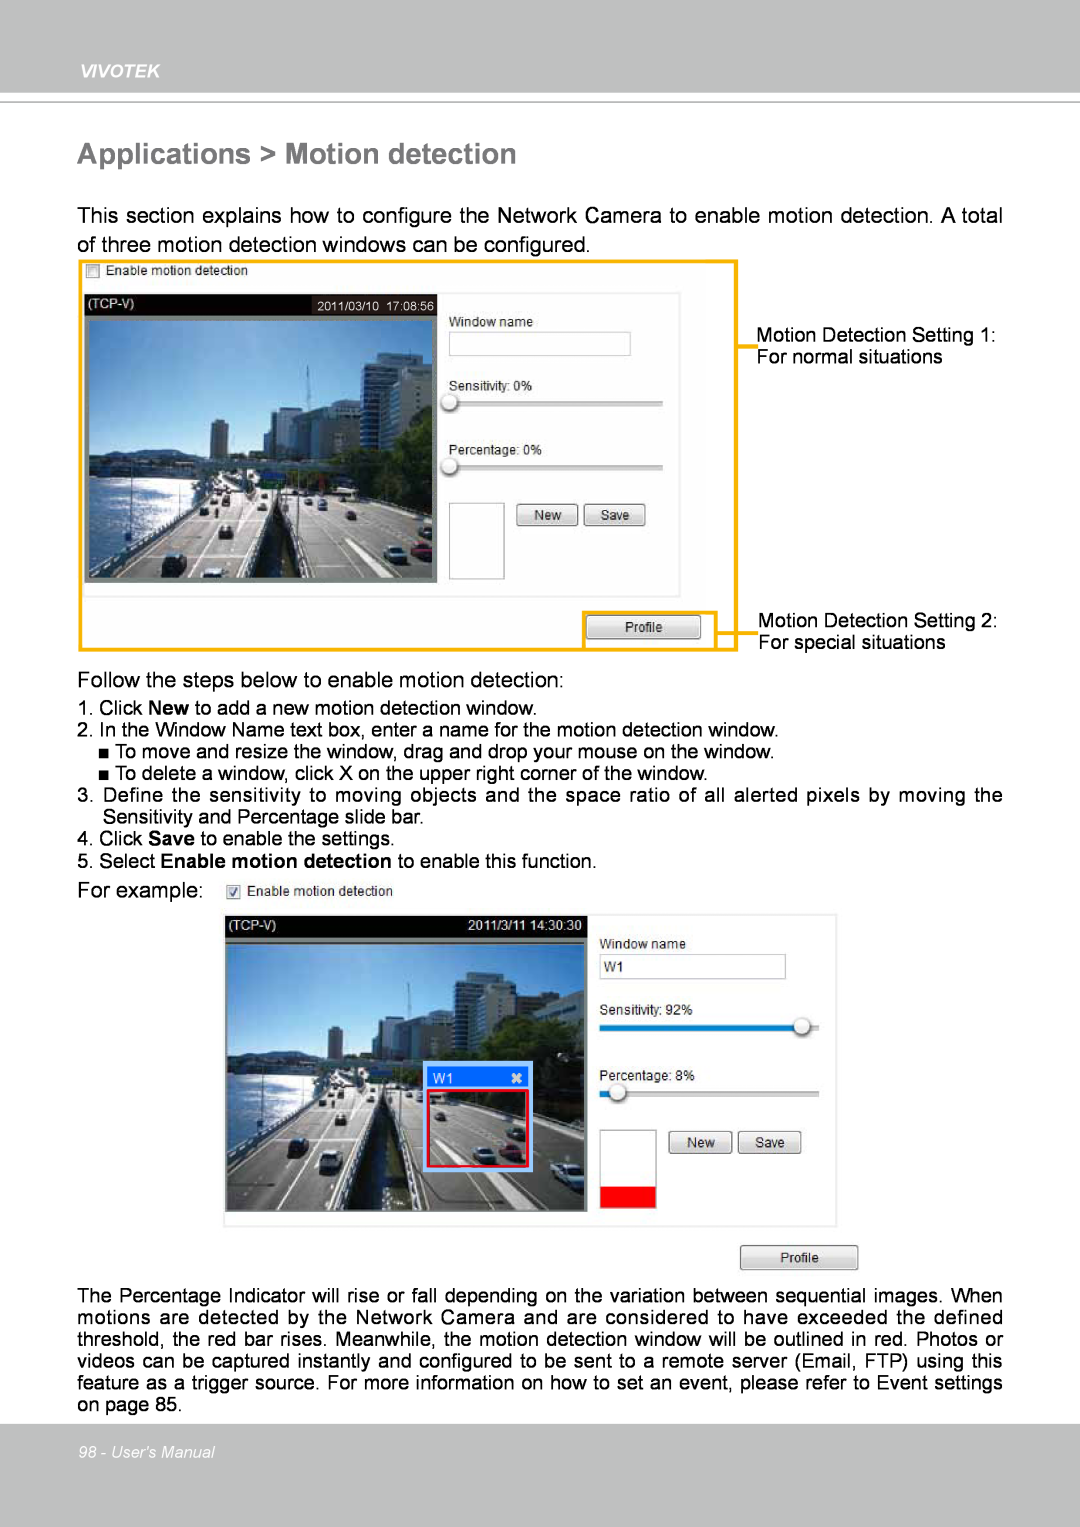 Vivotek IP8352 manual Applications > Motion detection, Follow the steps below to enable motion detection, For example 